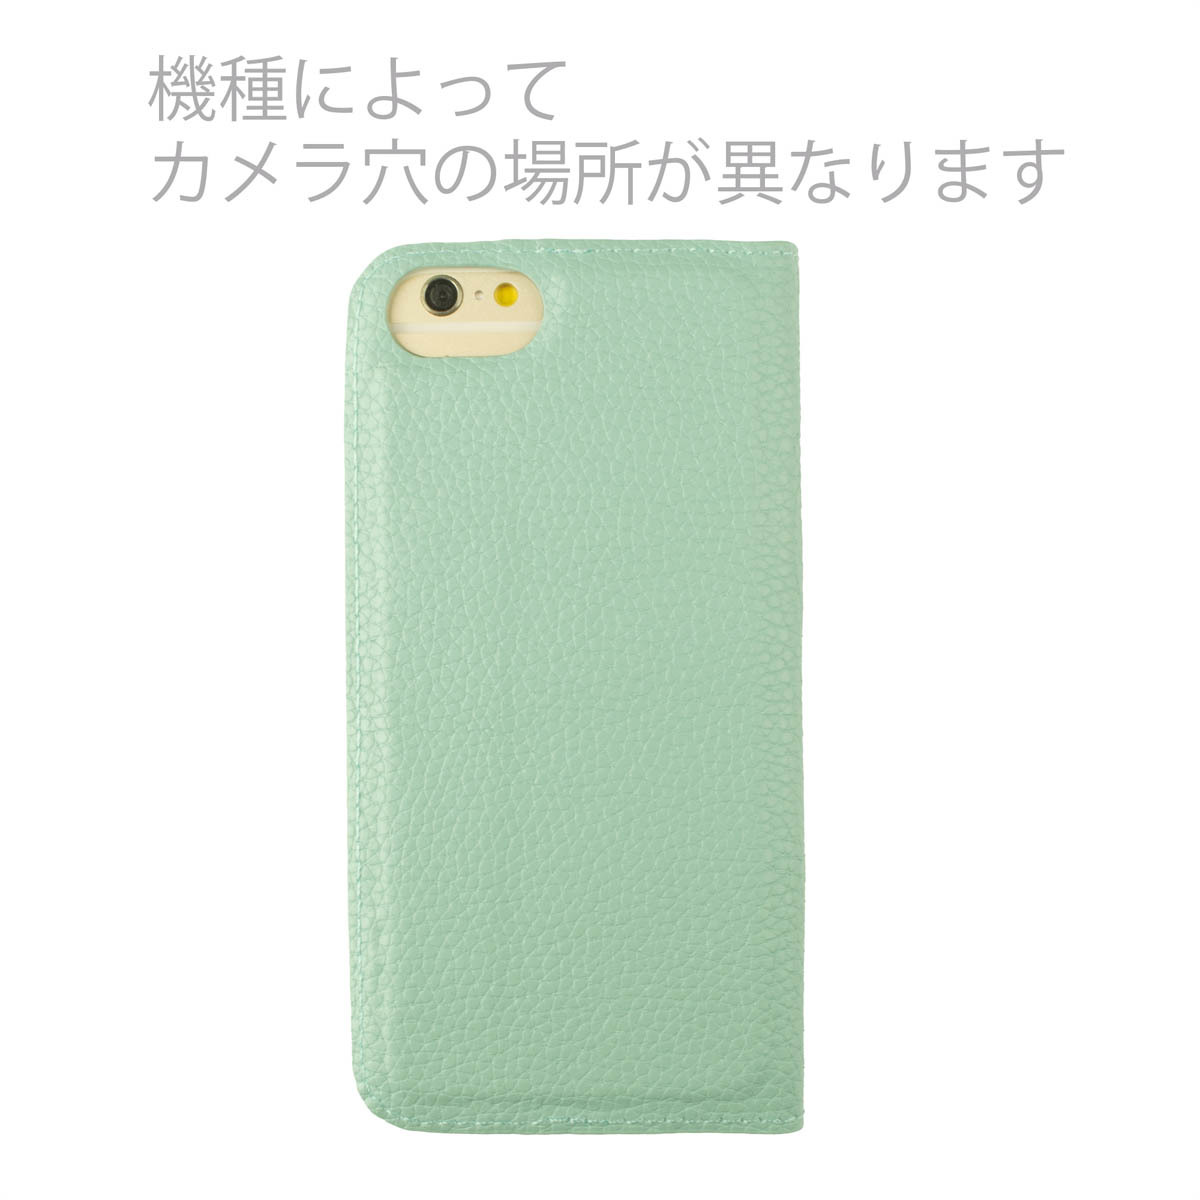 iphone13 case notebook type iphone 13 case iPhone 13 pocketbook cover I ho n green green shrink leather leather thin type light free shipping 